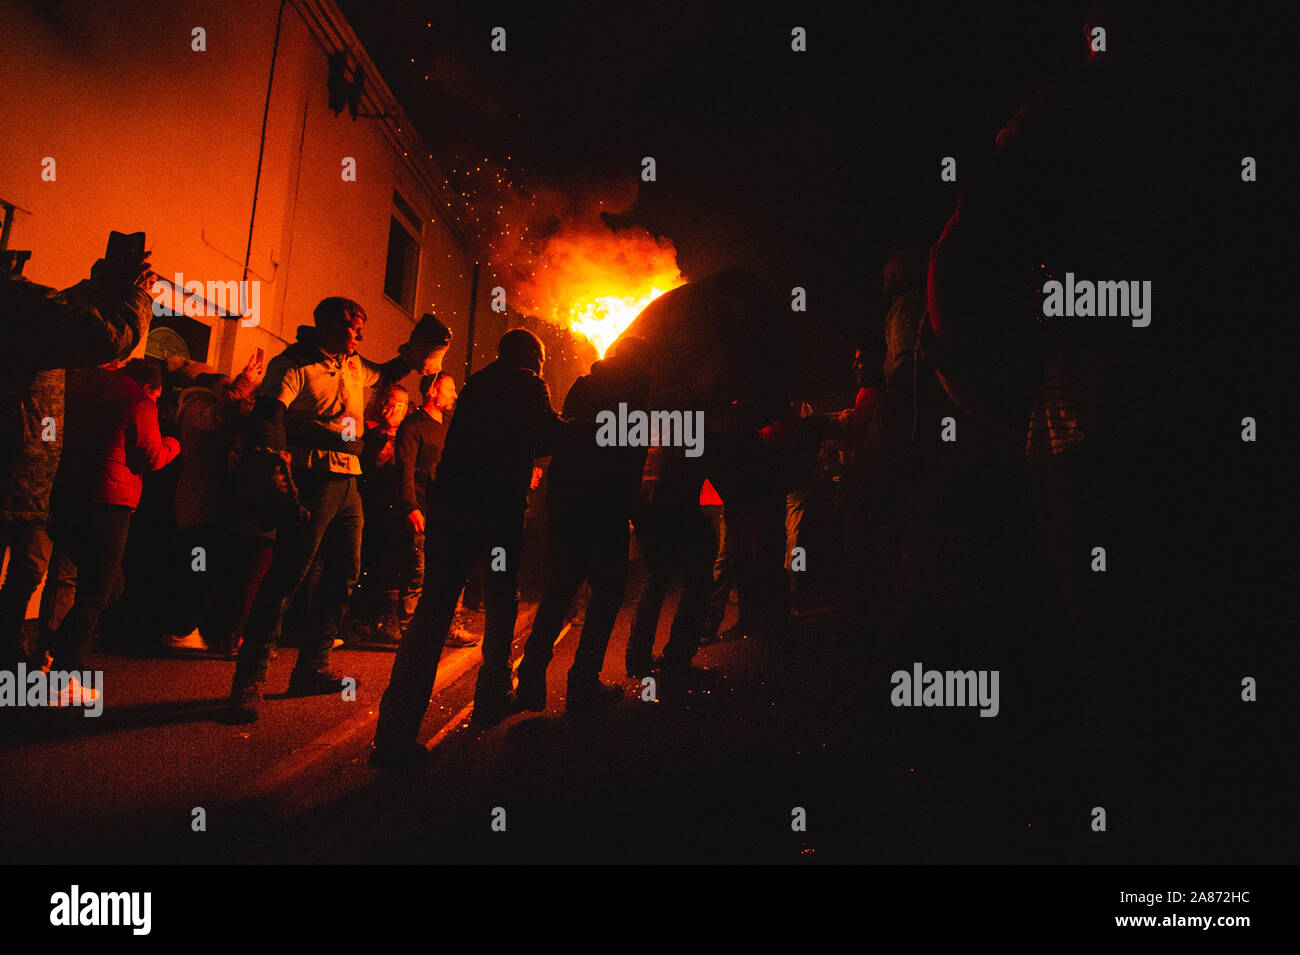 Ottery St Mary, UK, 5th Nov 2019, Participants take part in the Ottery St Mary Tar Barrels event to celebrate the 5th of November by carrying burning barrels up and down the street. Credit: Guy Peterson/ Alamy Live News Stock Photo